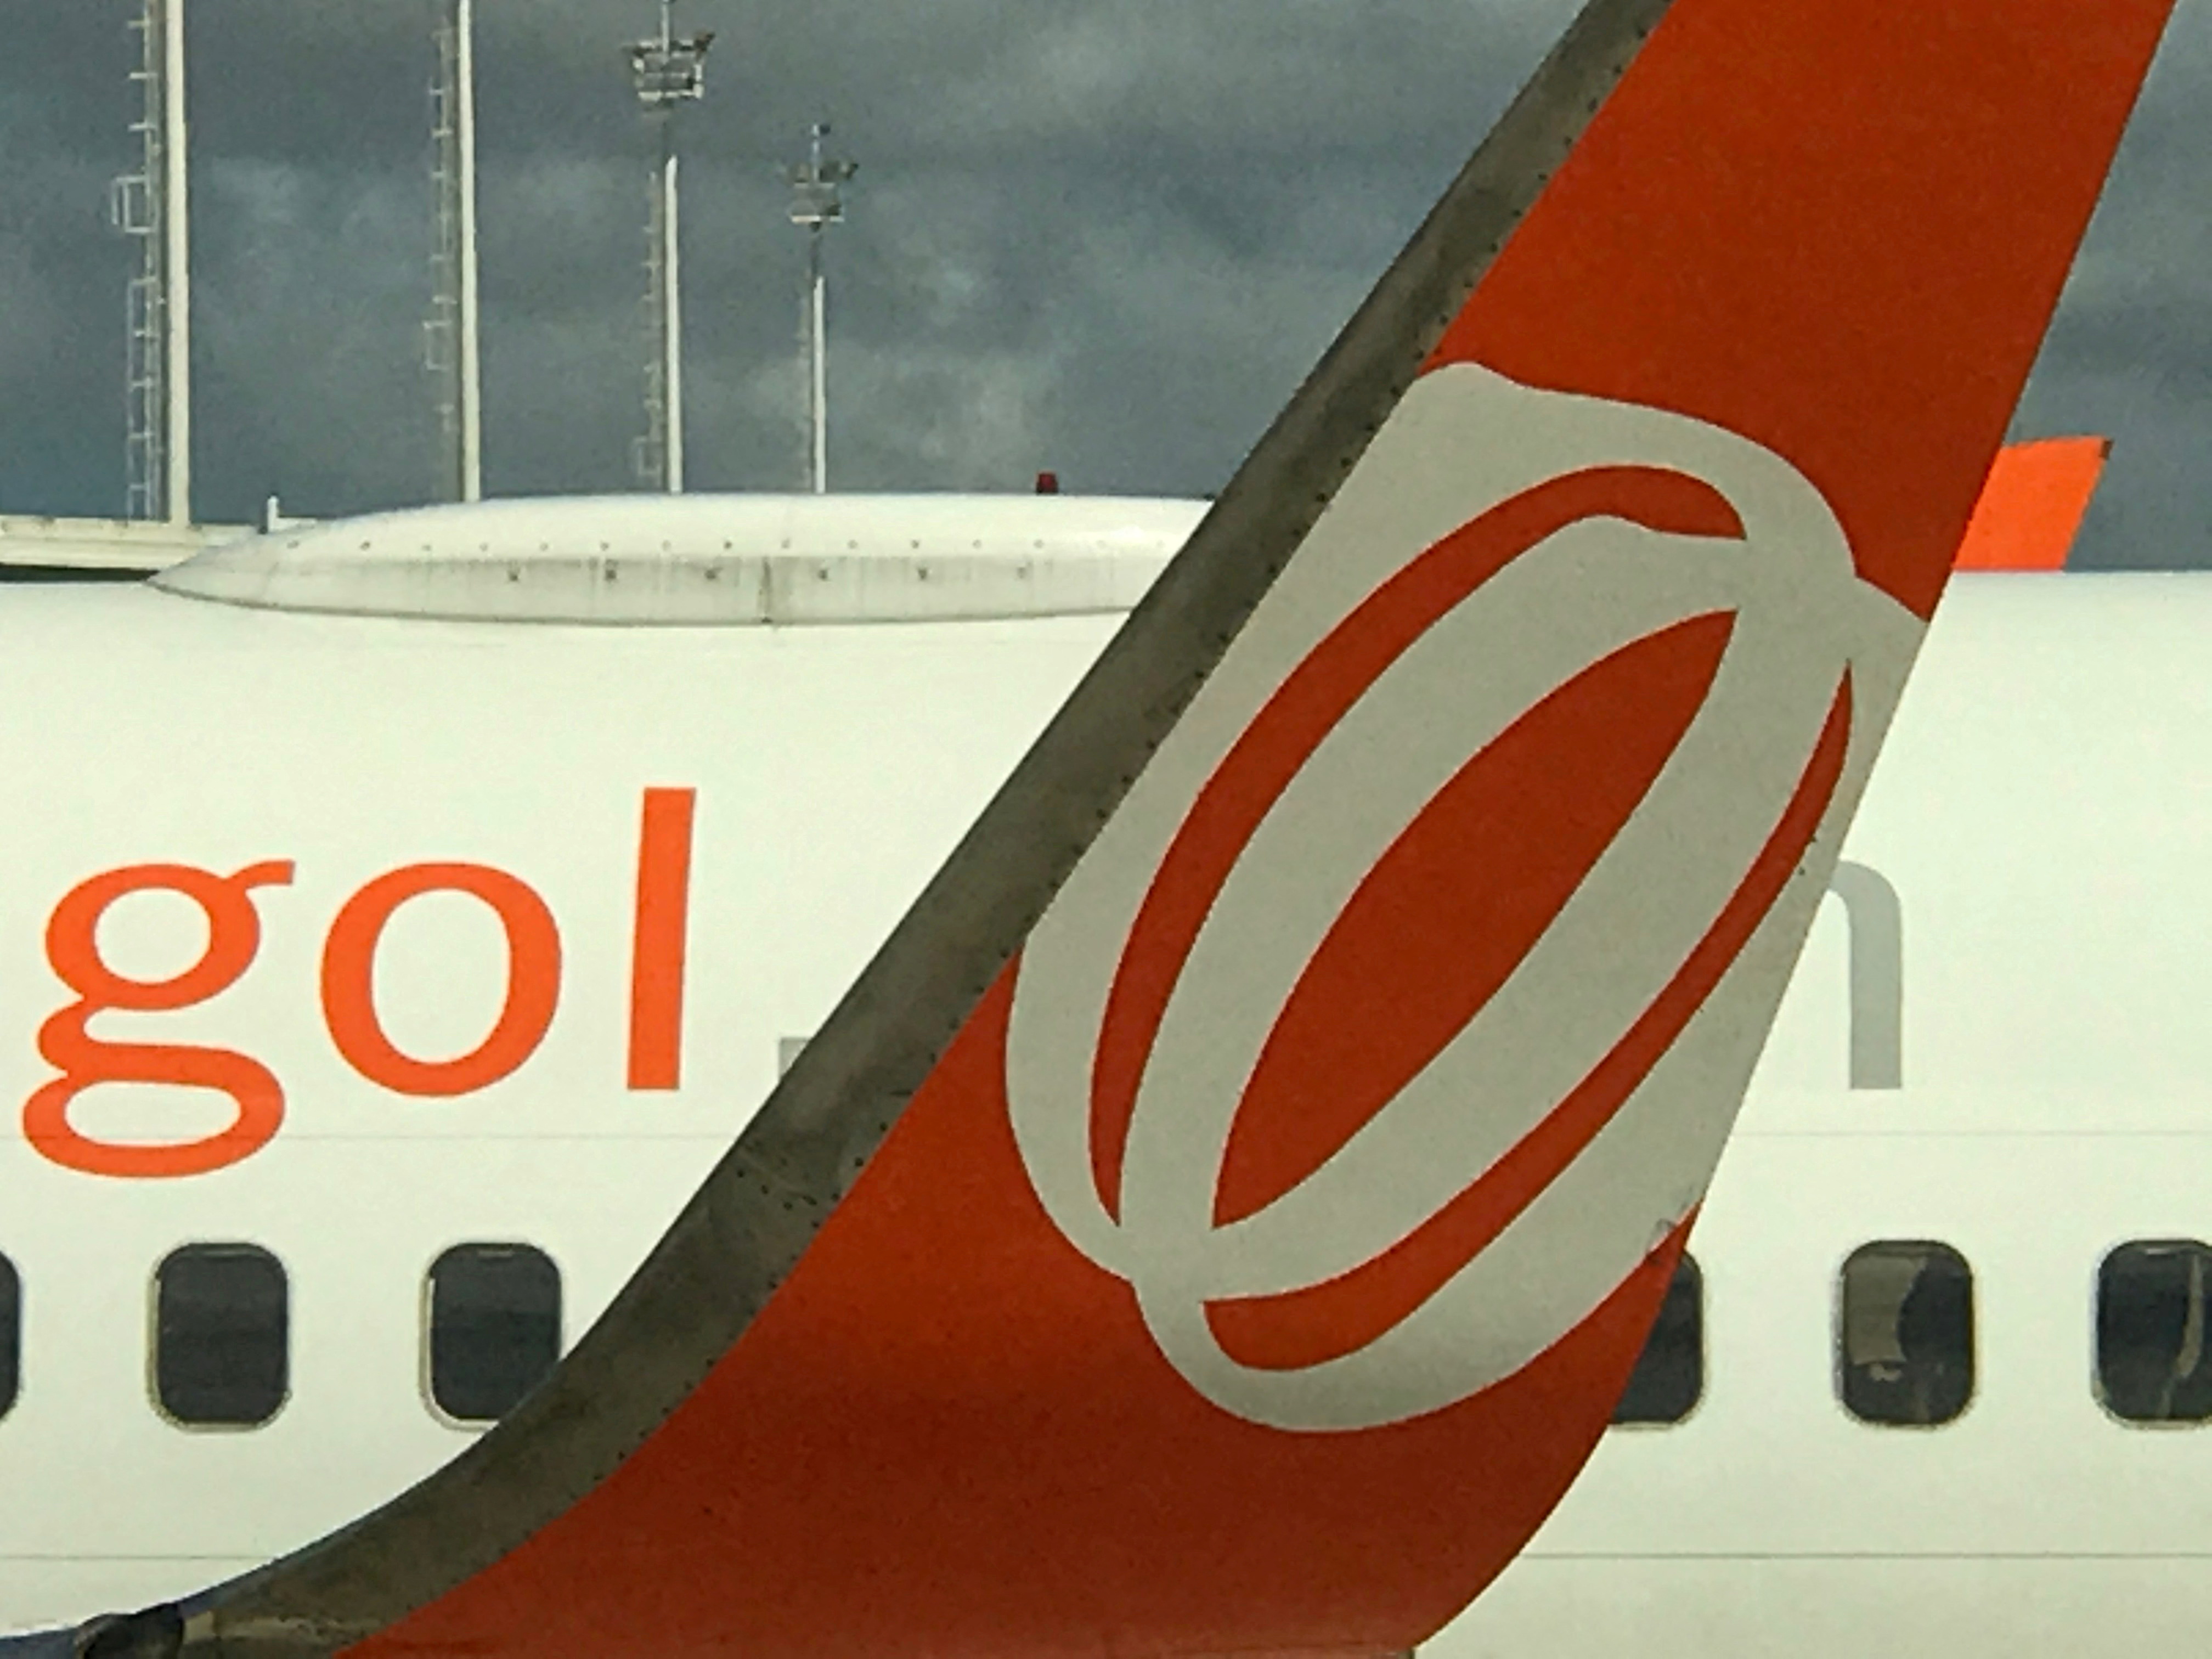 The logo of Brazilian airline Gol Linhas Aereas Inteligentes SA is seen on a tail of an airplane at Augusto Severo International Airport in Natal